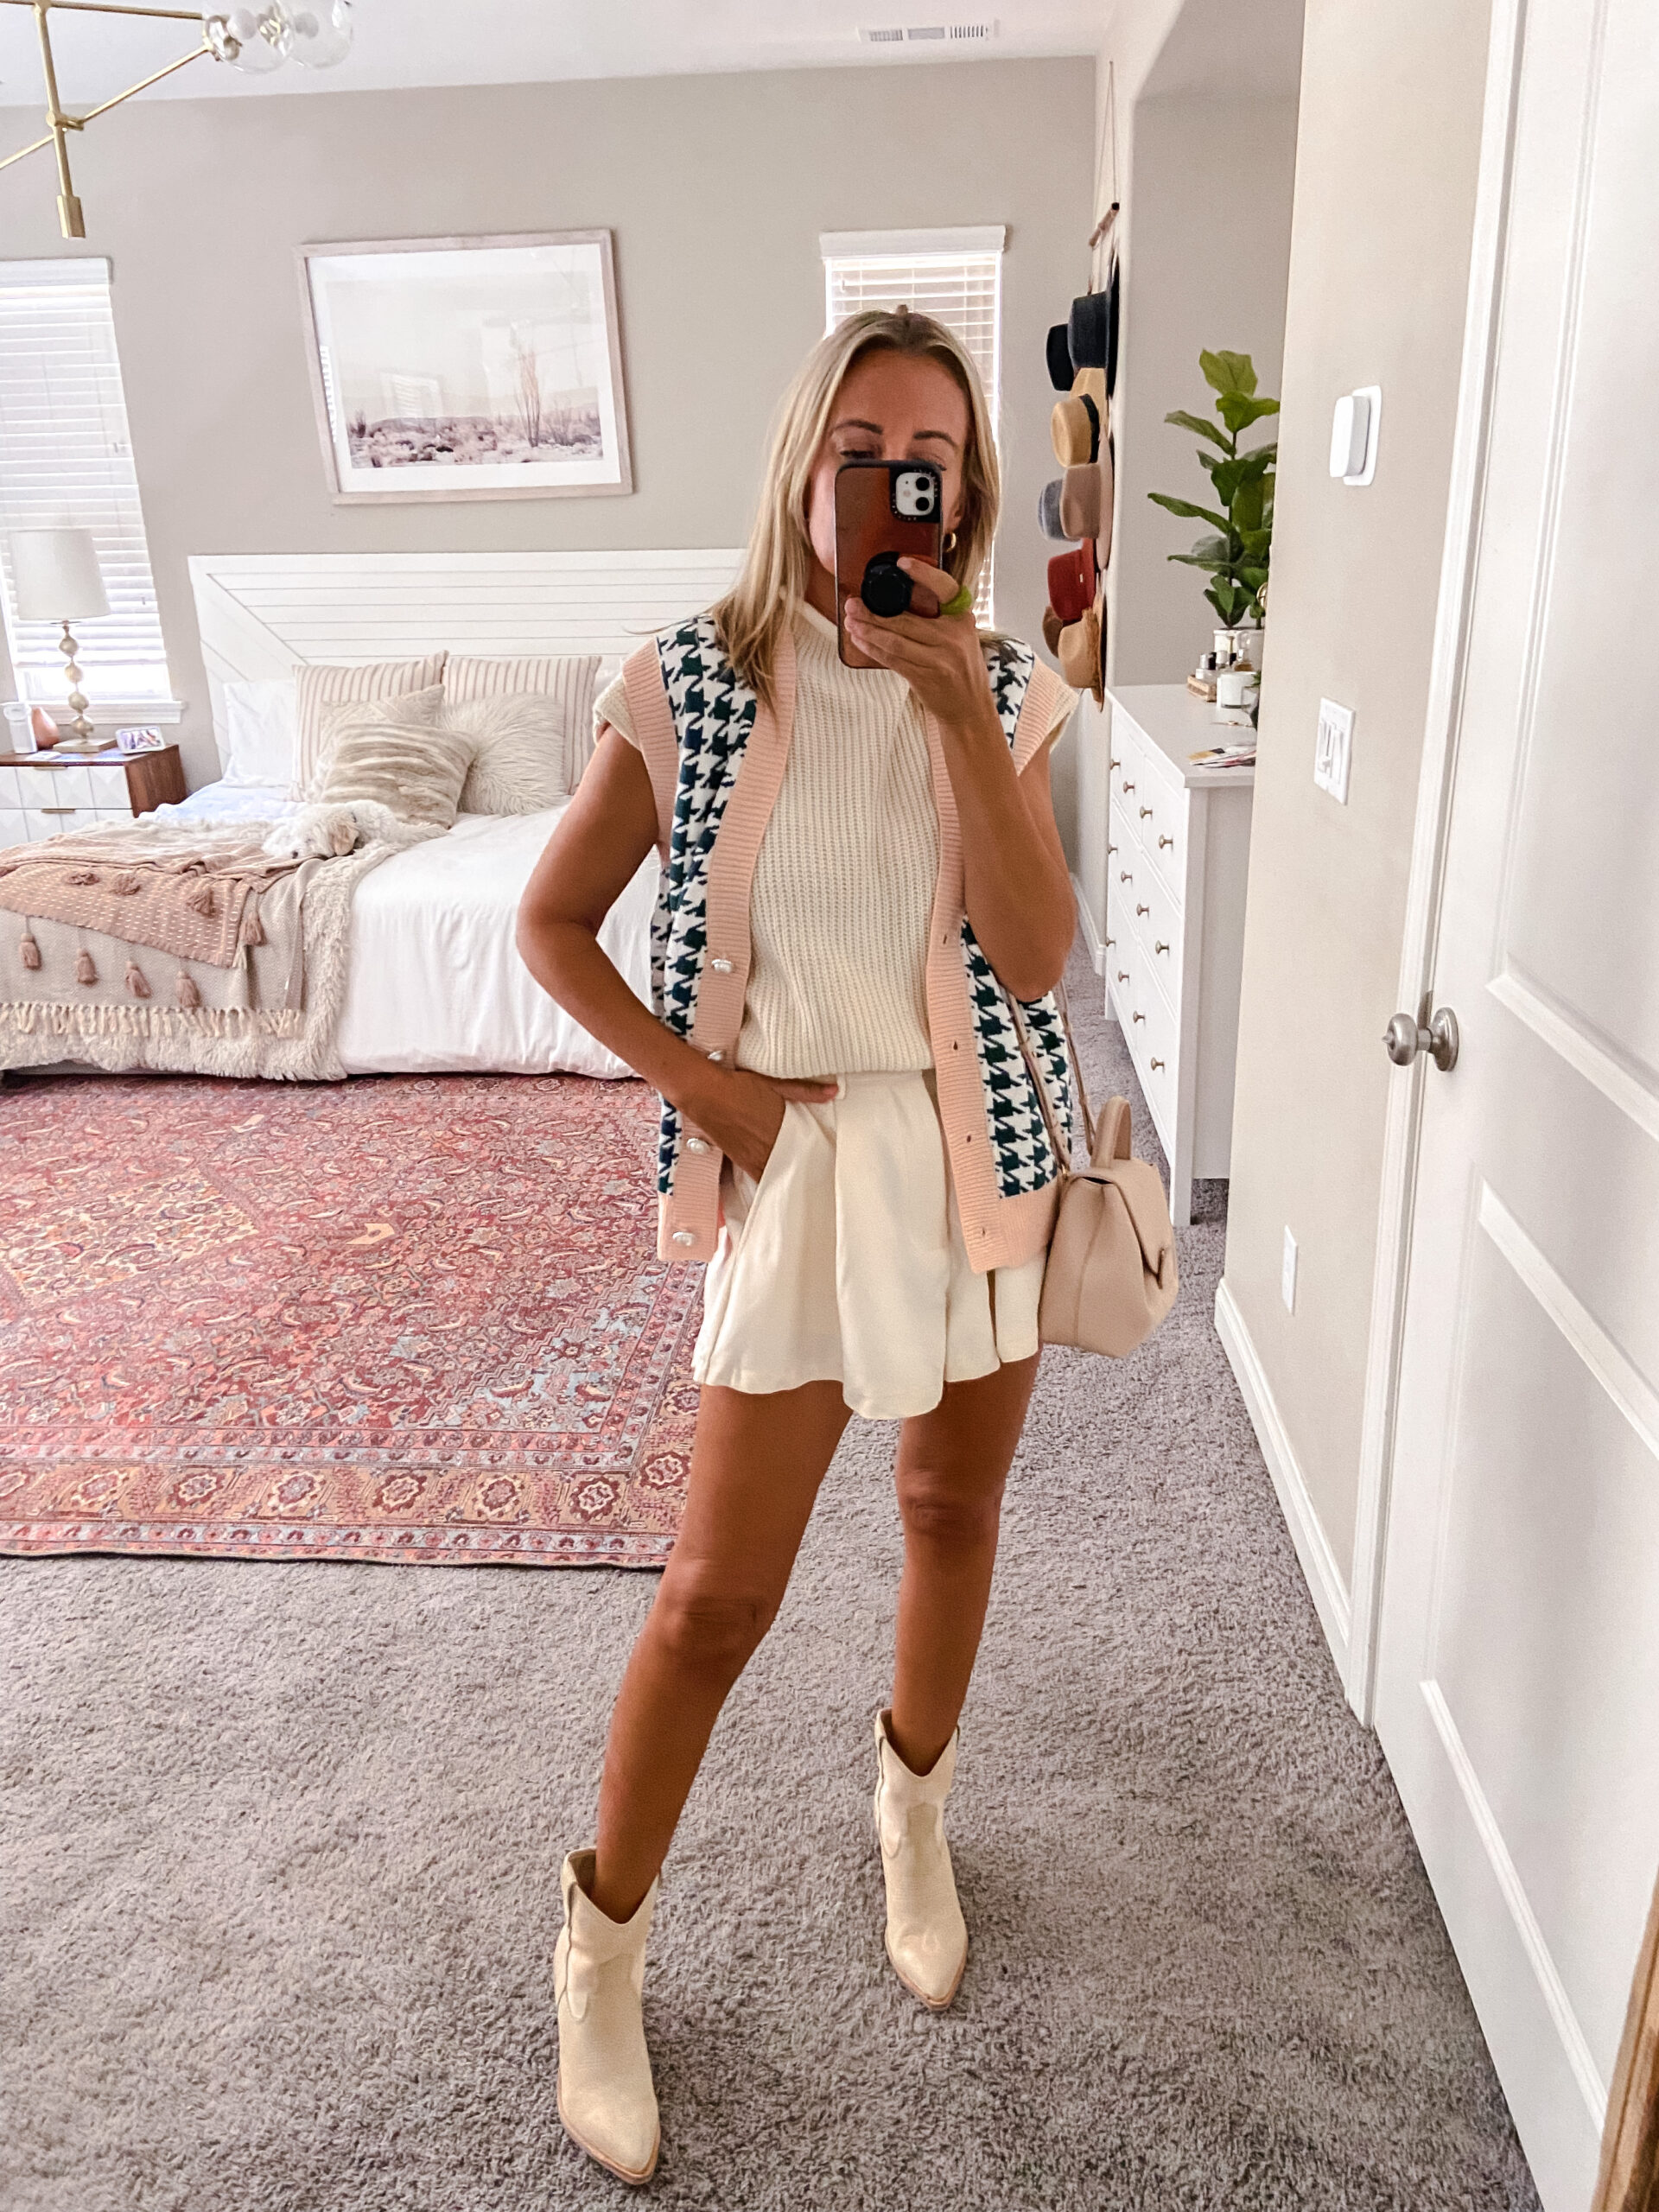 MY LATEST AMAZON FALL FASHION FINDS-Jaclyn De Leon style. Sharing a few of my latest Amazon pieces perfect to wear now and in to the fall.